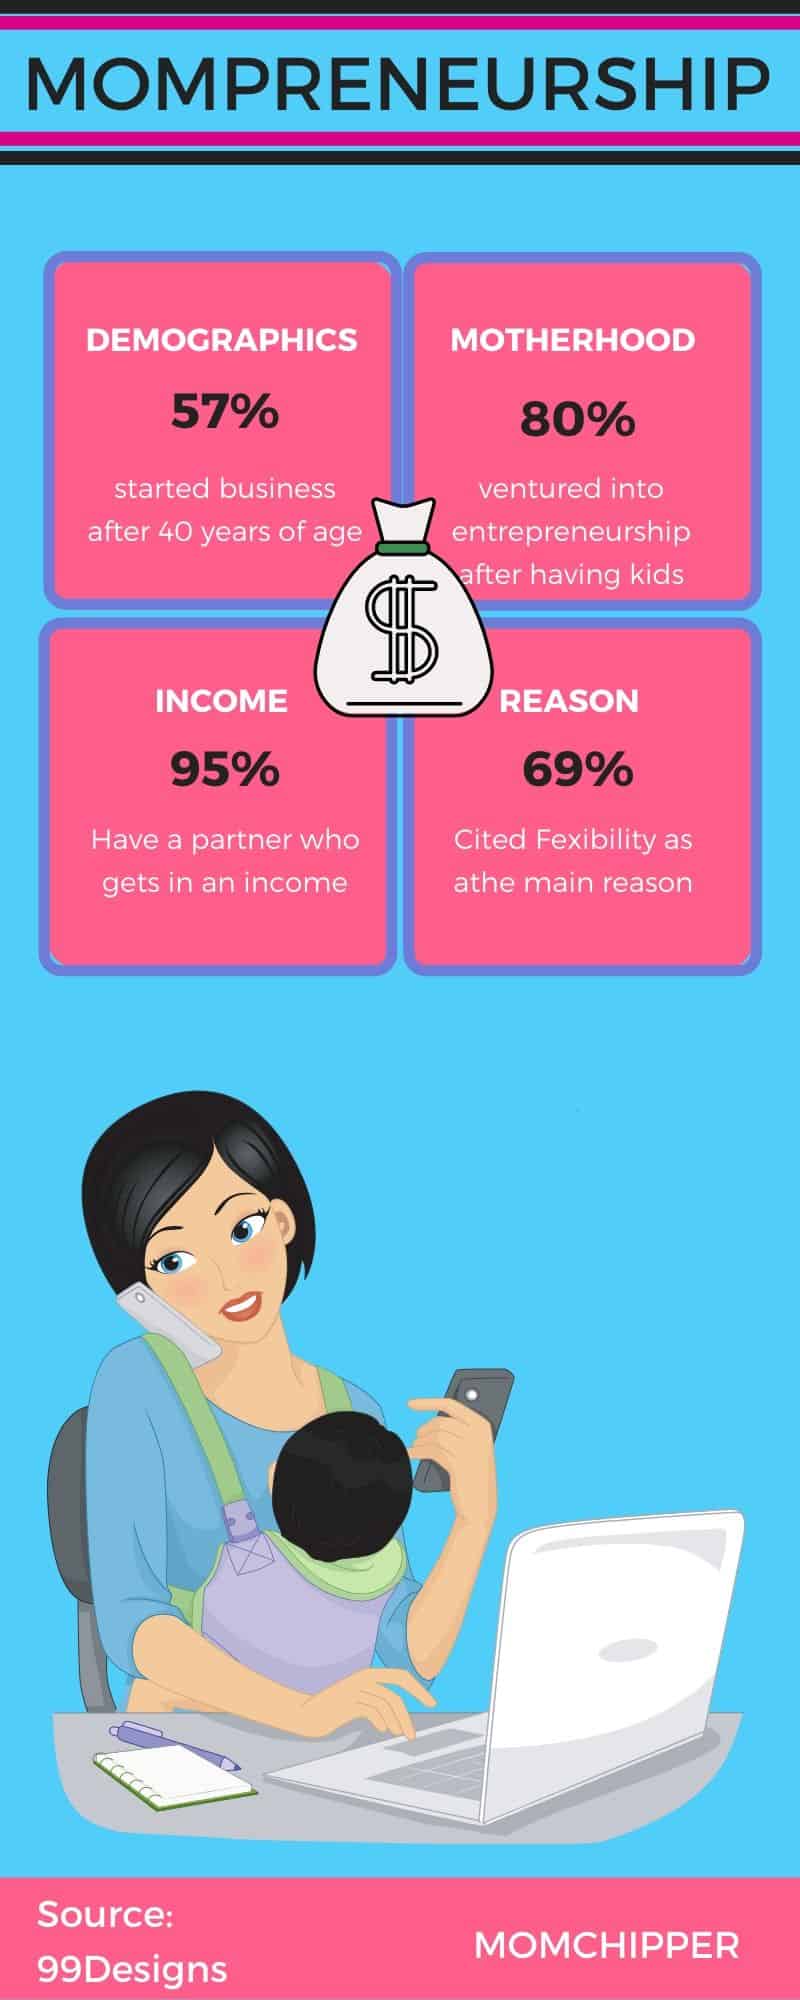 reasons to be a mompreneur